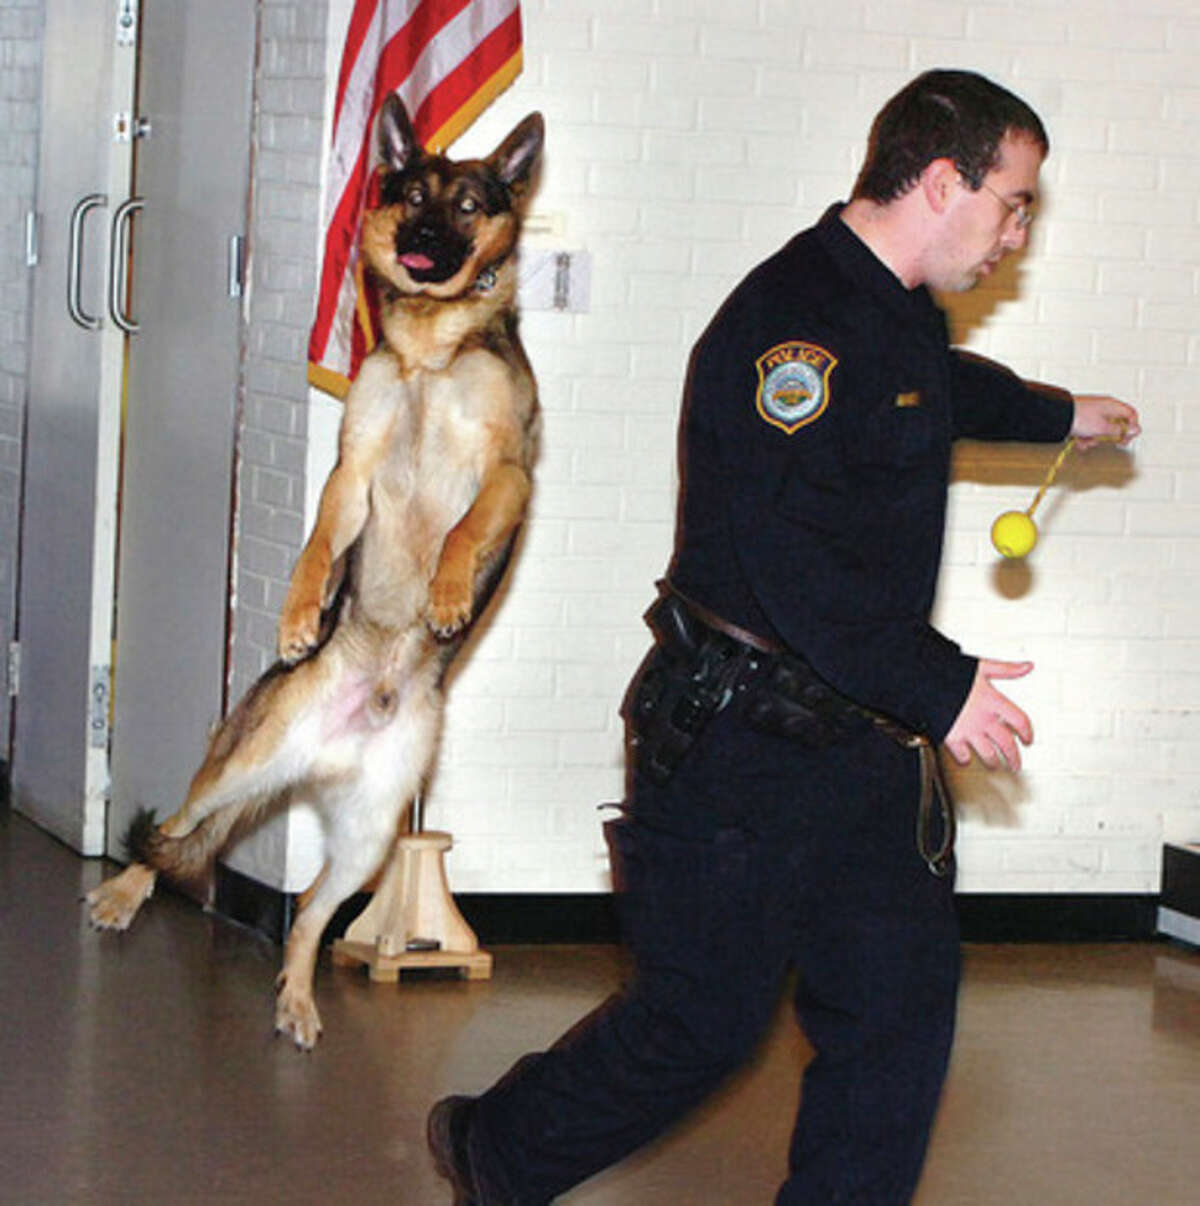 Hour Photo Alex von Kleydorff; Enzo jumps for his reward of a play ball after he sniffed out some 'contraband' during a demonstration of his skills with partner Wilton Police Officer Steven Rangel at Wednesdays Kiwanis meeting at WEPCO.